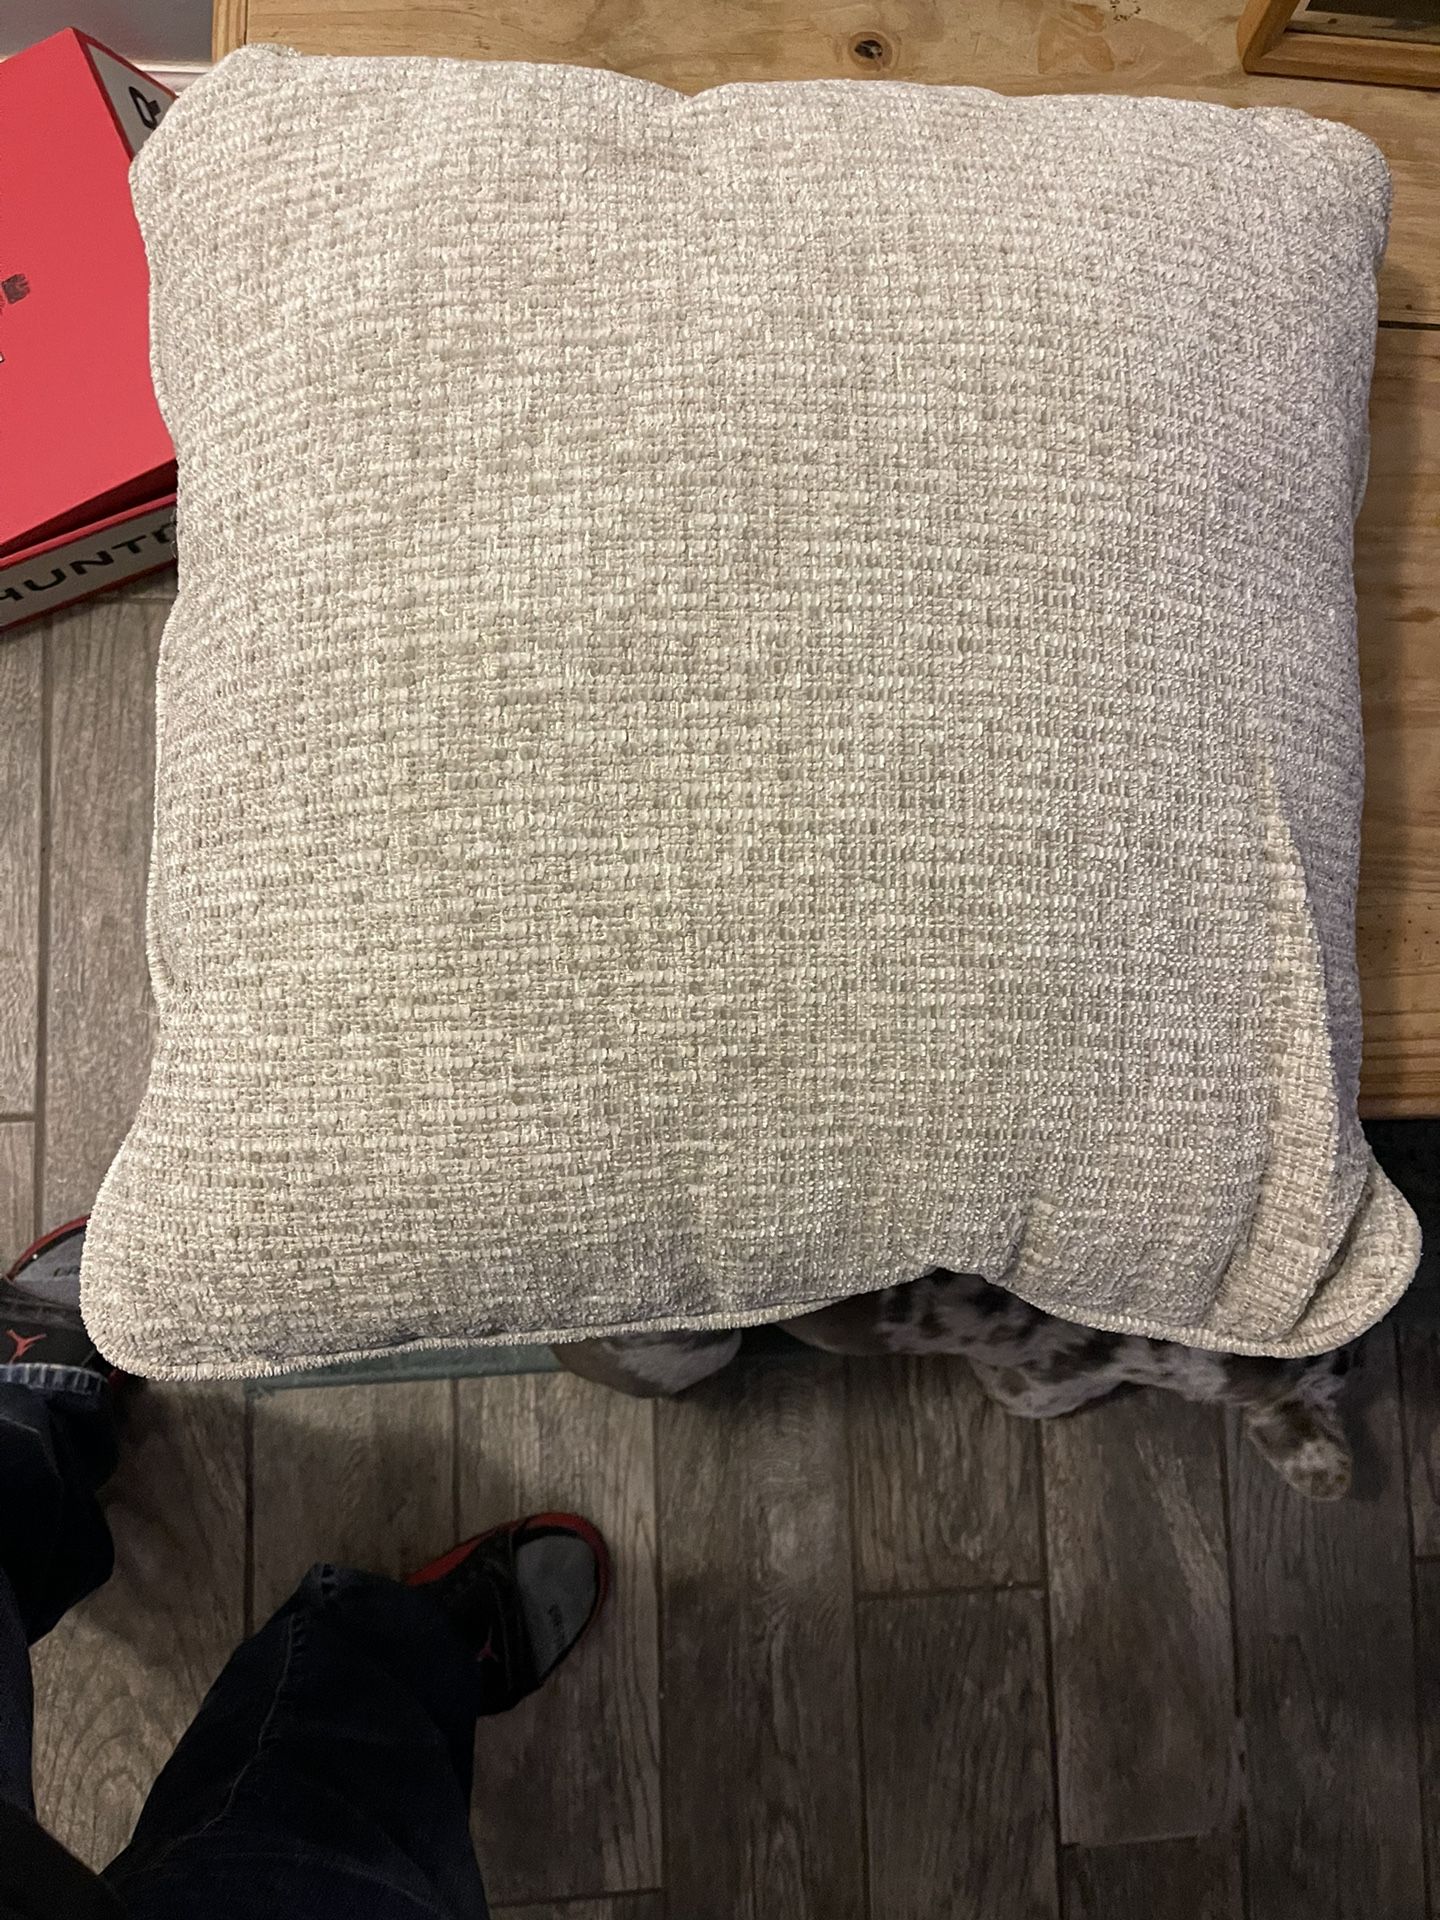 Decorative Pillows For Couch